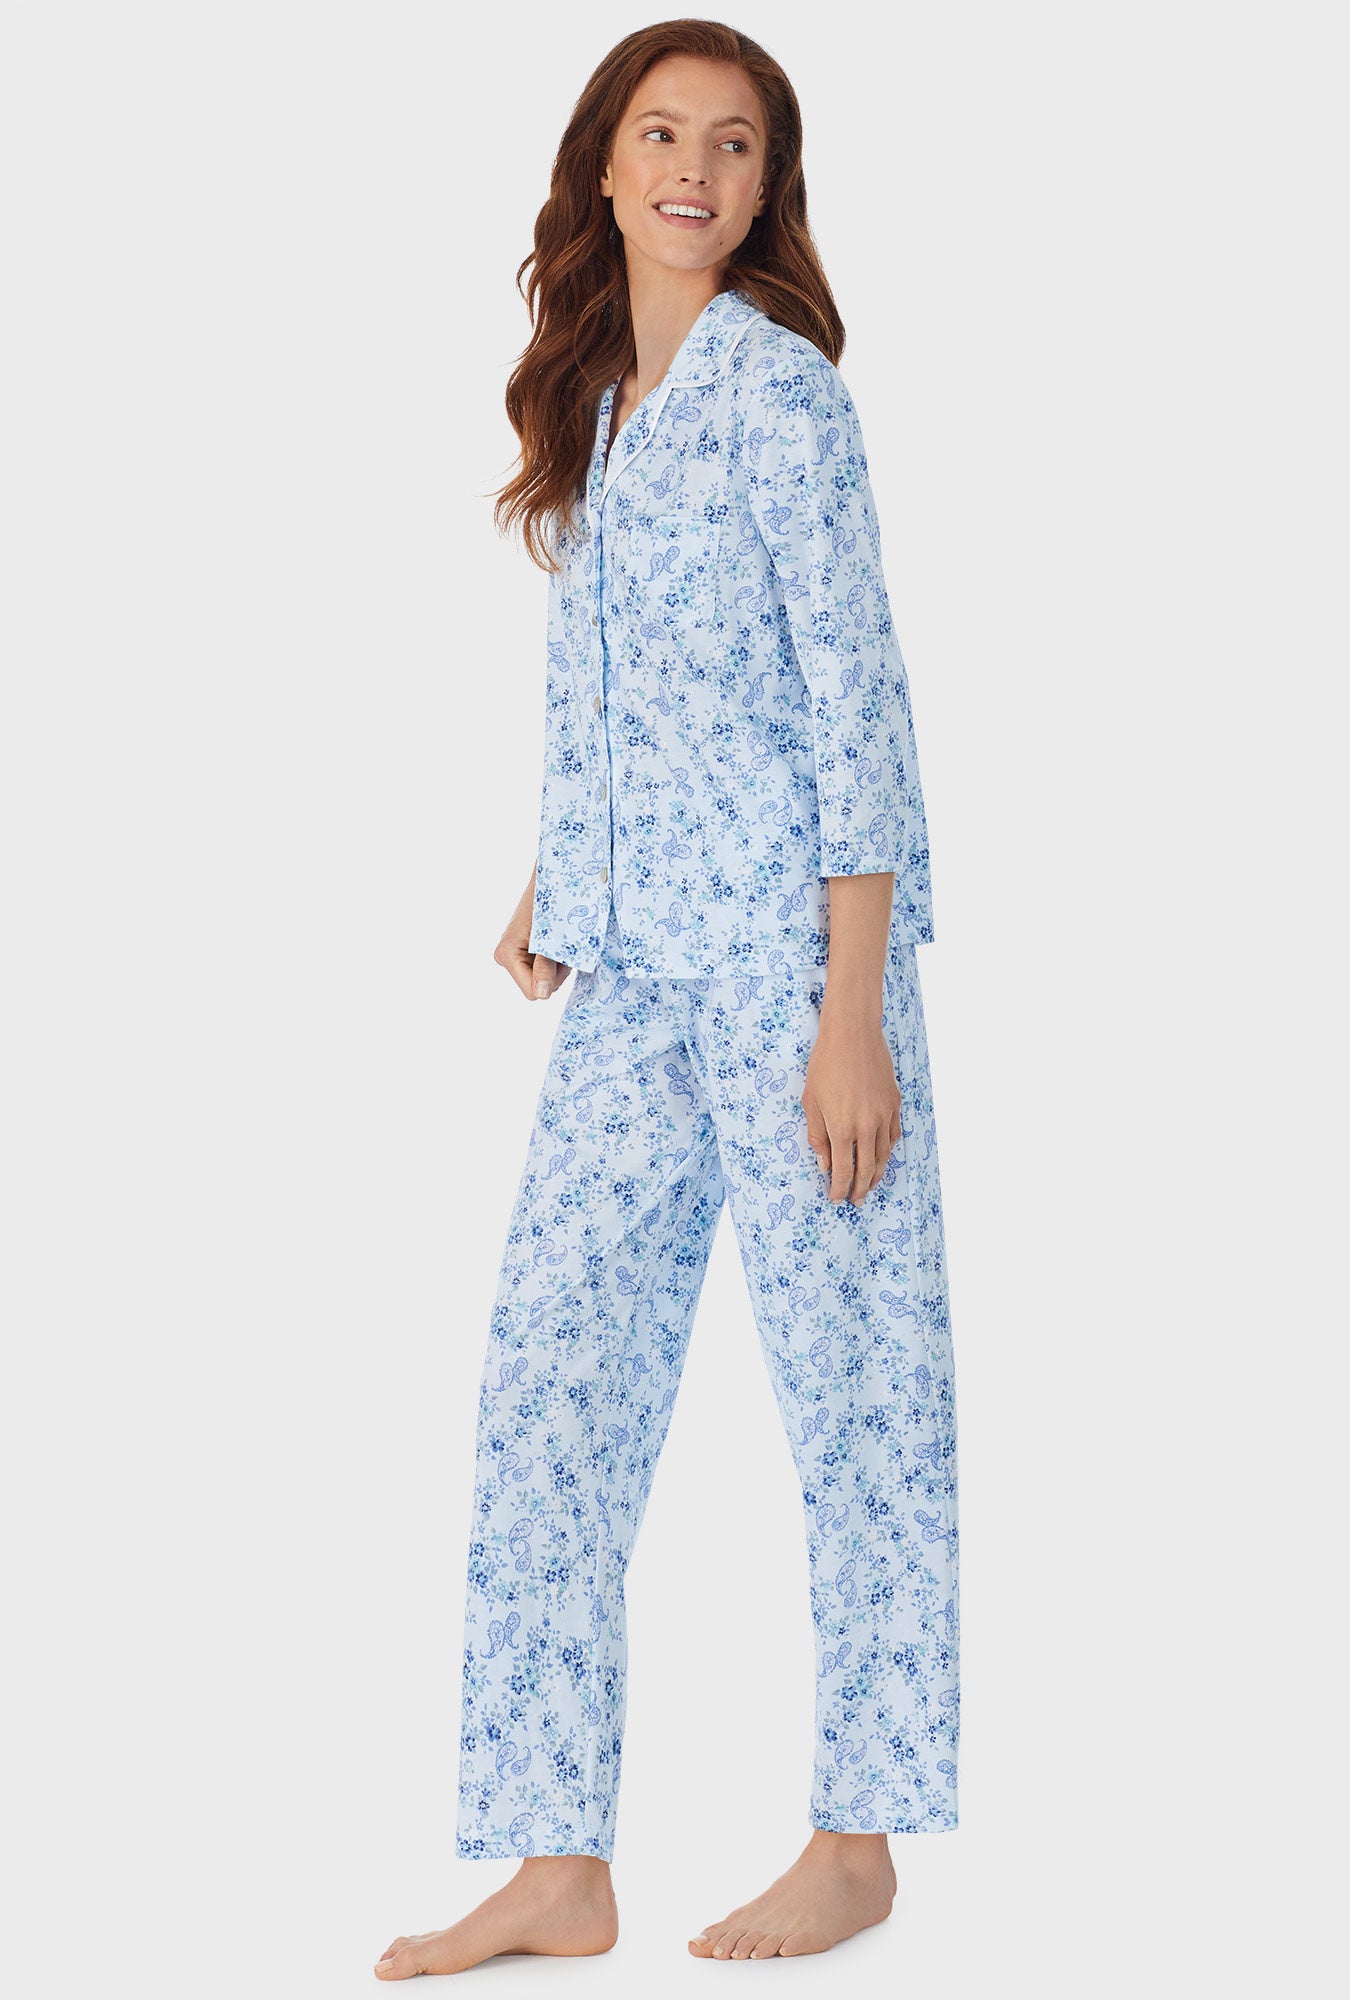 A lady wearing white long pajama set with Paisley Bouquet print